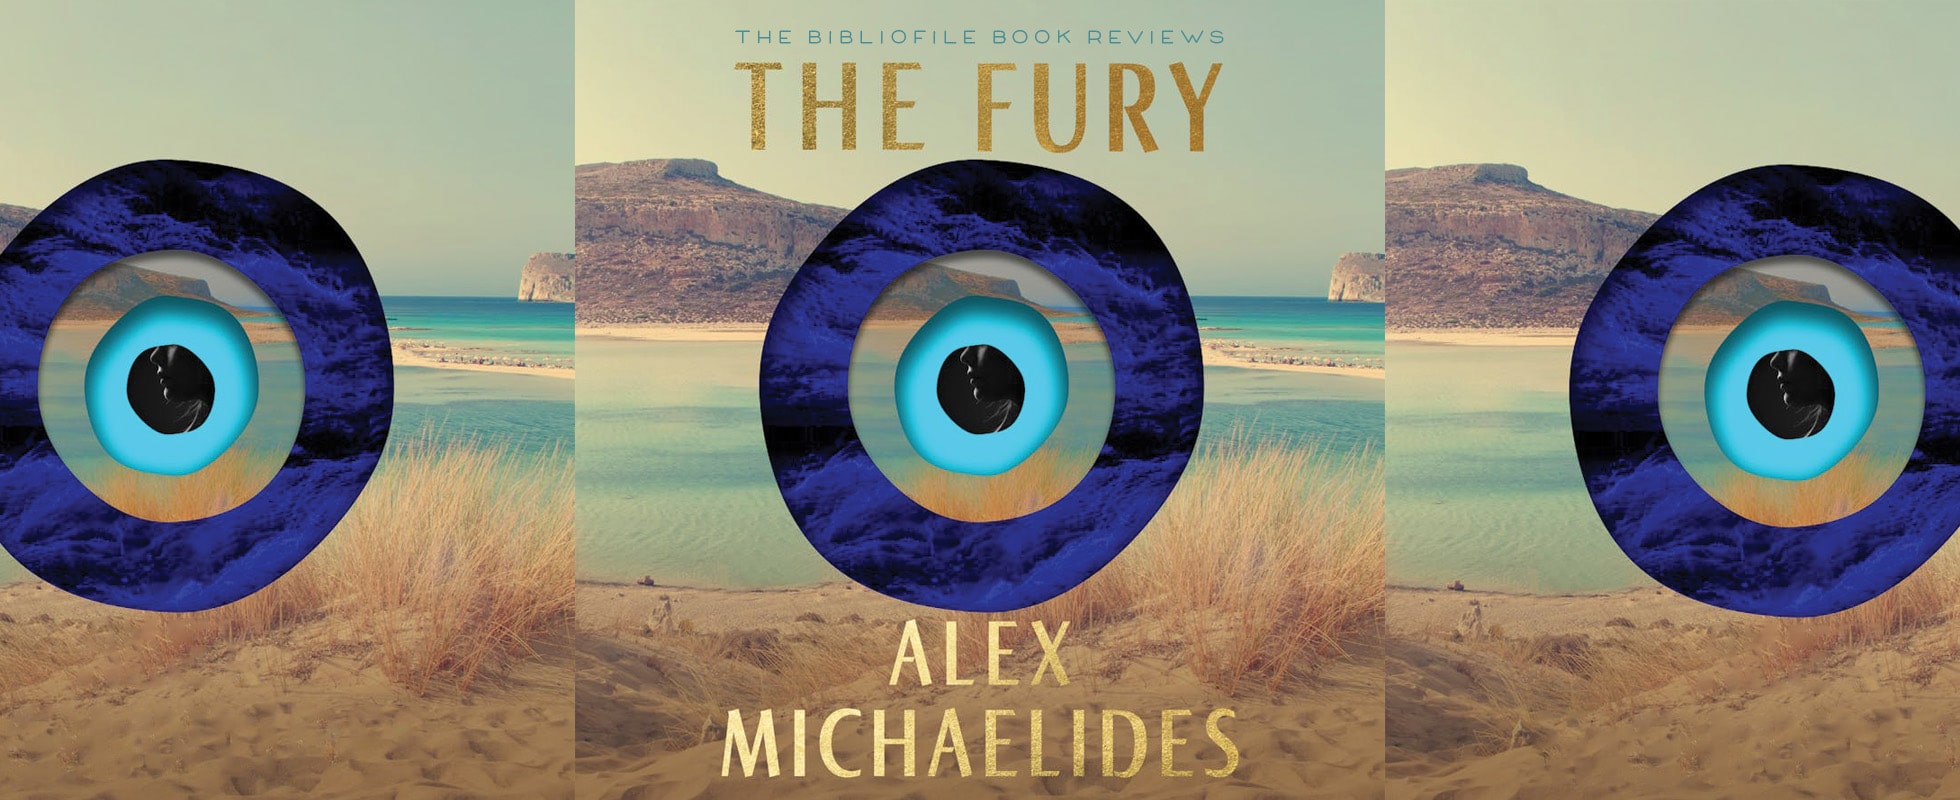 the fury by alex michaelides book review plot summary synopsis recap discussion spoilers